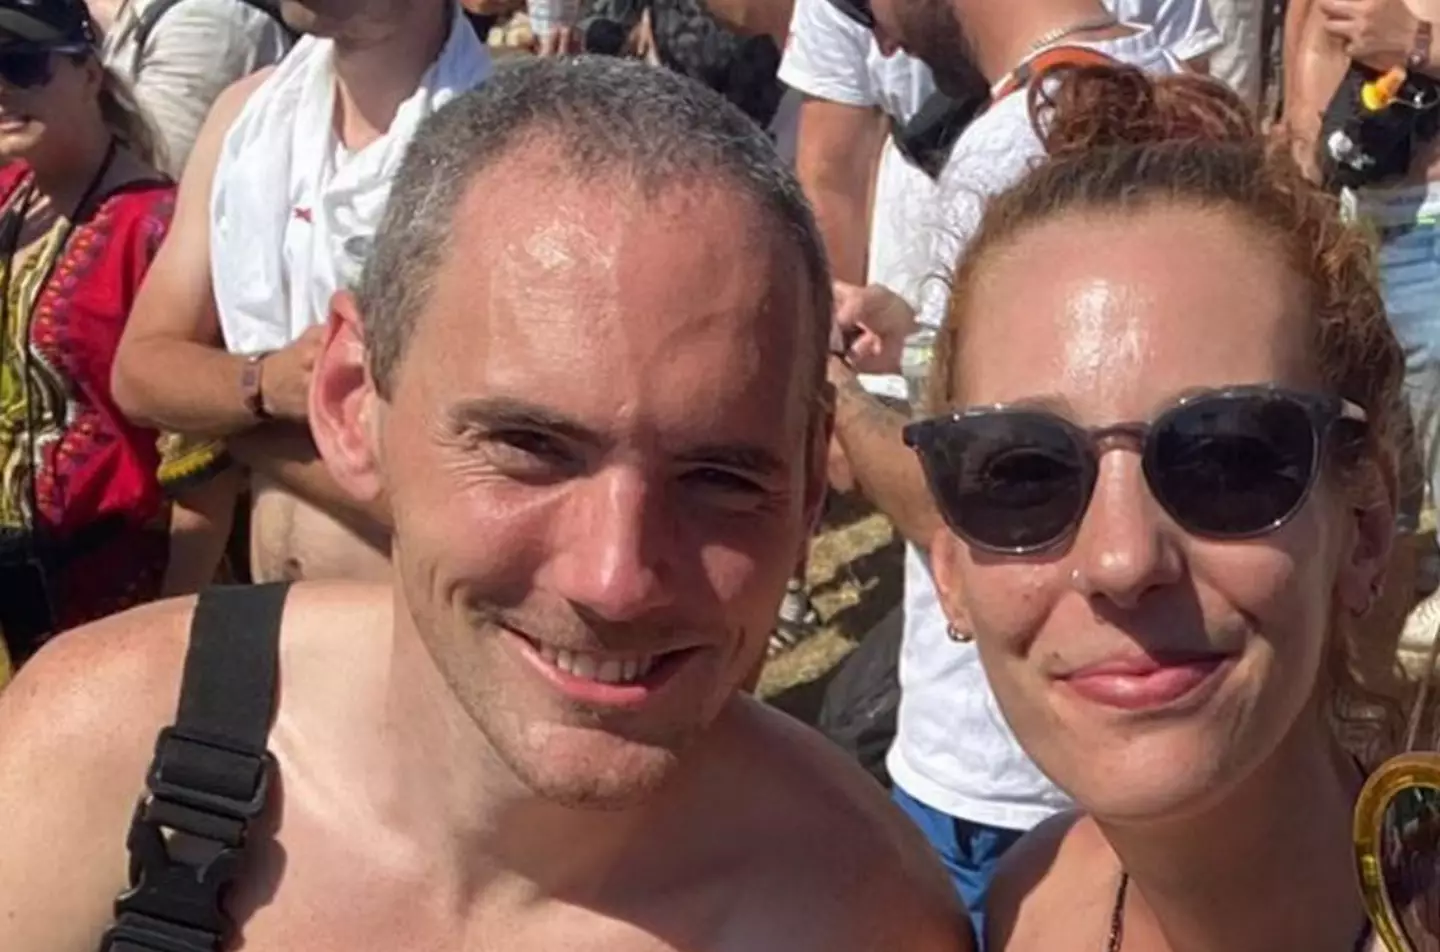 Neil Cox and Danielle Quiggan caused a stir when they walked into a Somerset pub naked.